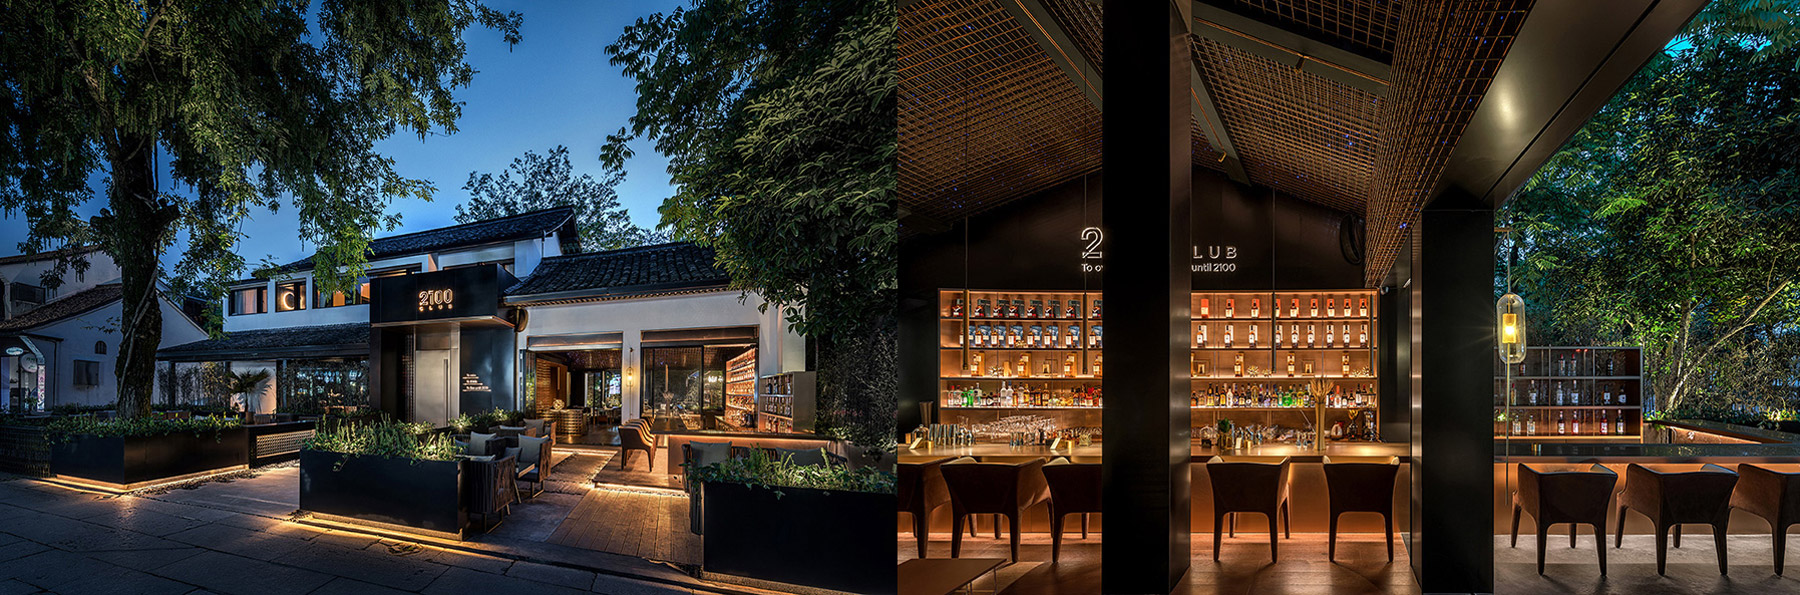 LYCS architecture sets 2100 club, the world's first blockchain bar in hangzhou